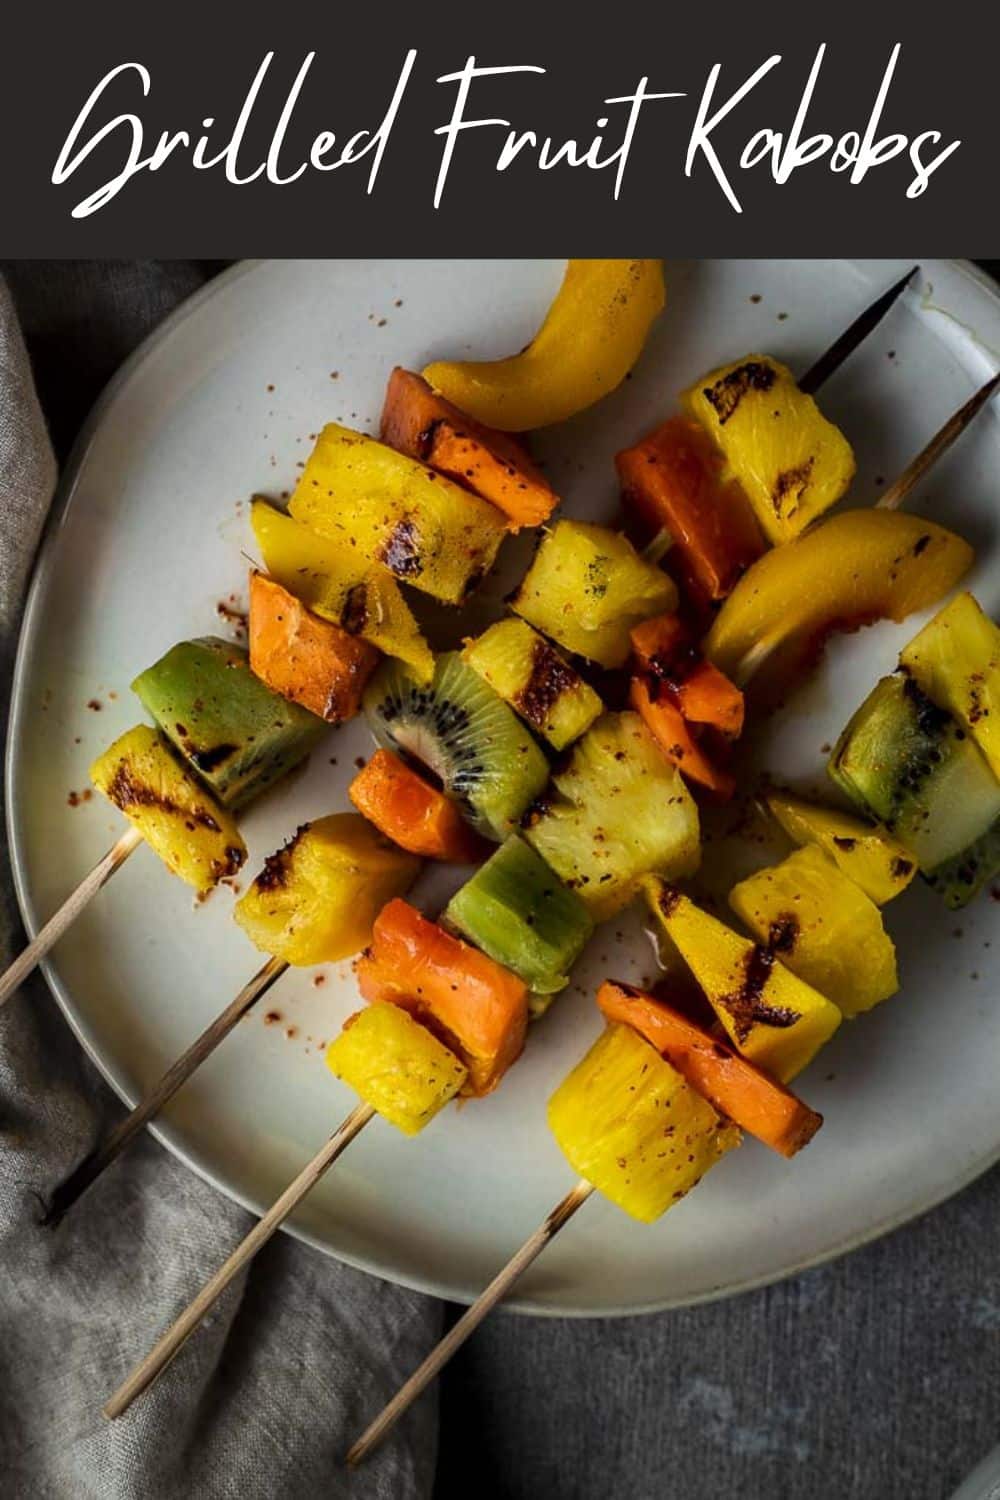 Easy Grilled Fruit Kabobs with Chili and Lime